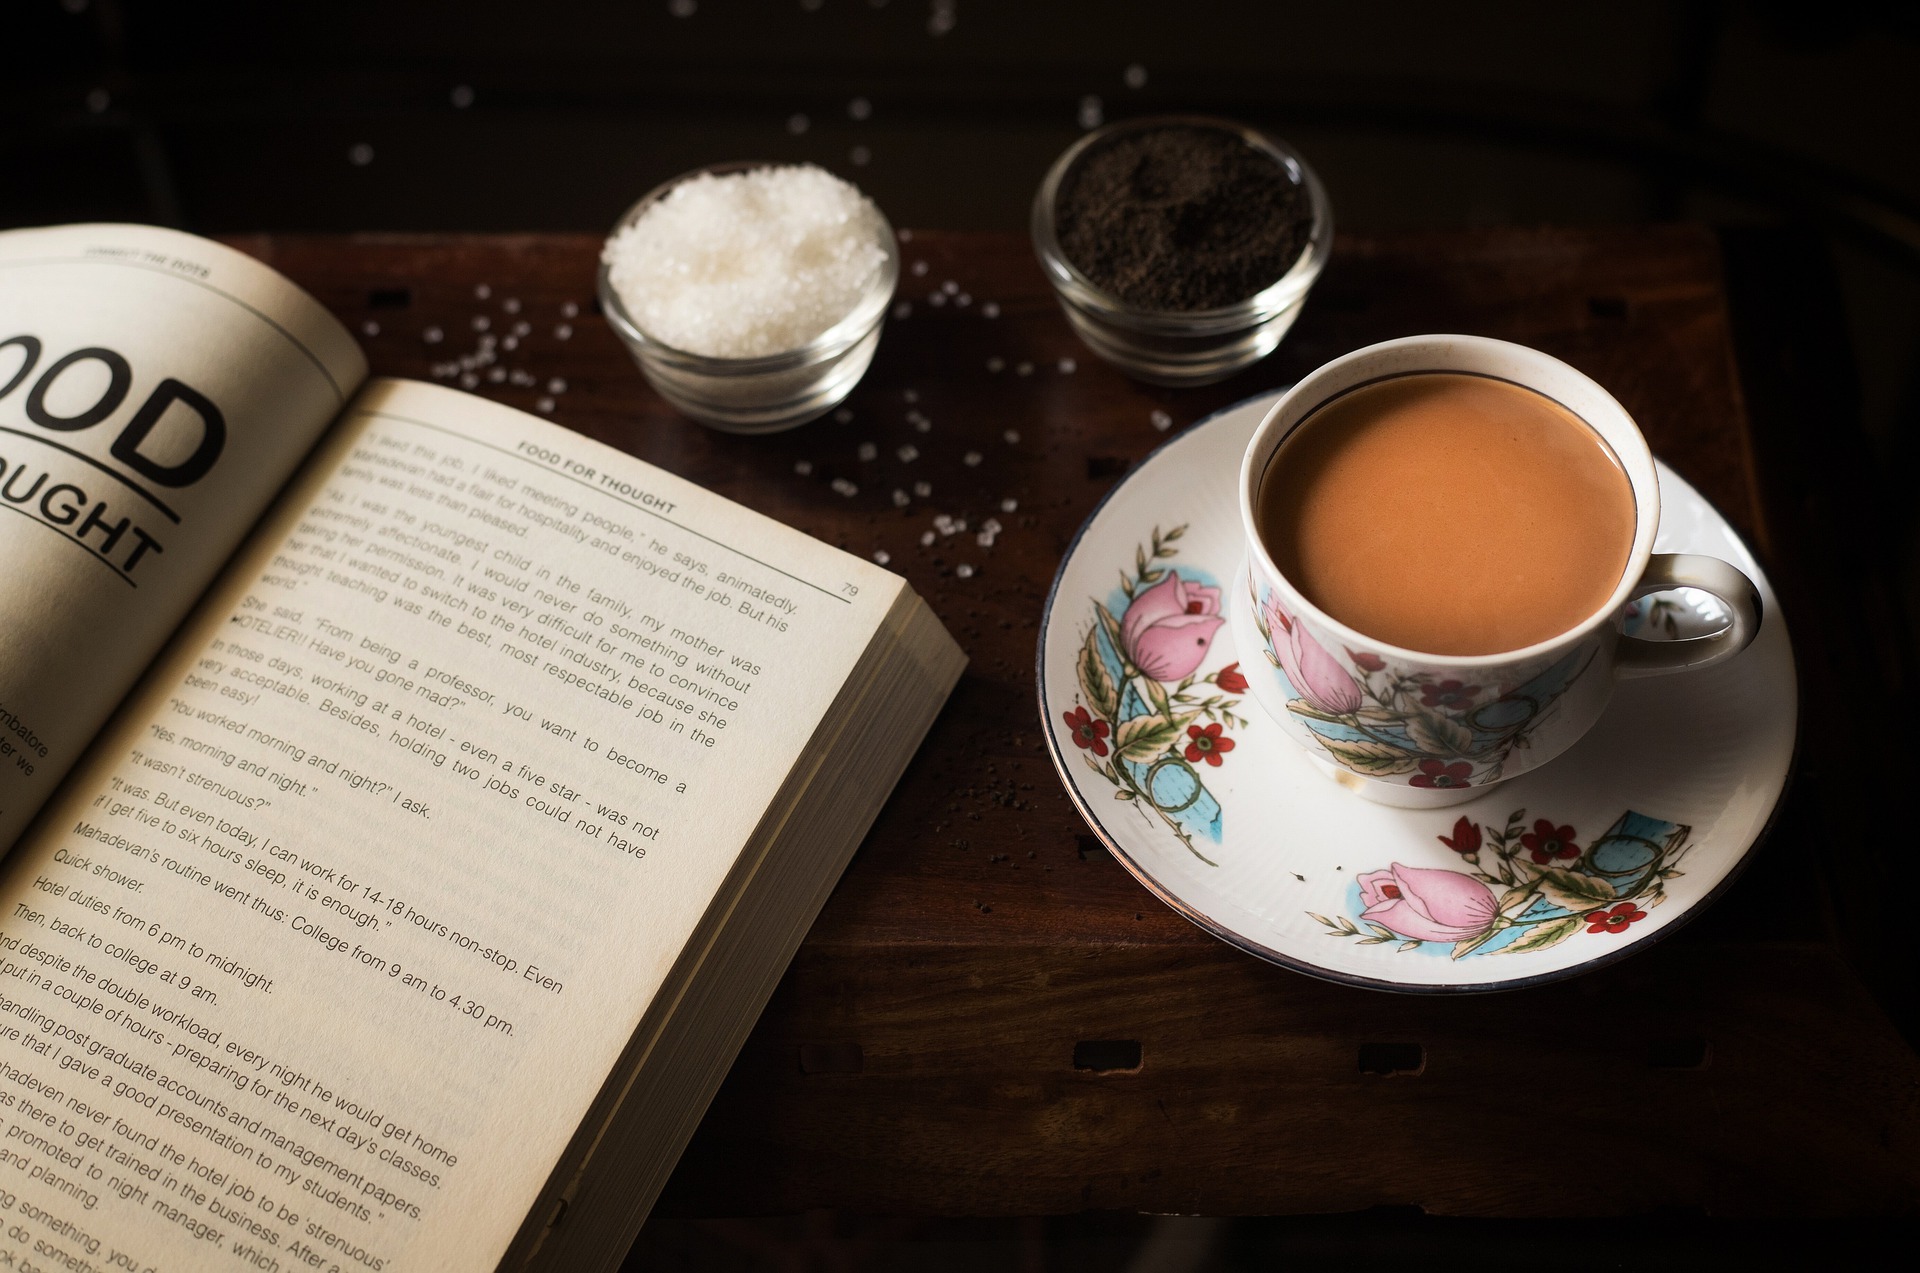 Book and cup of coffee with sugar